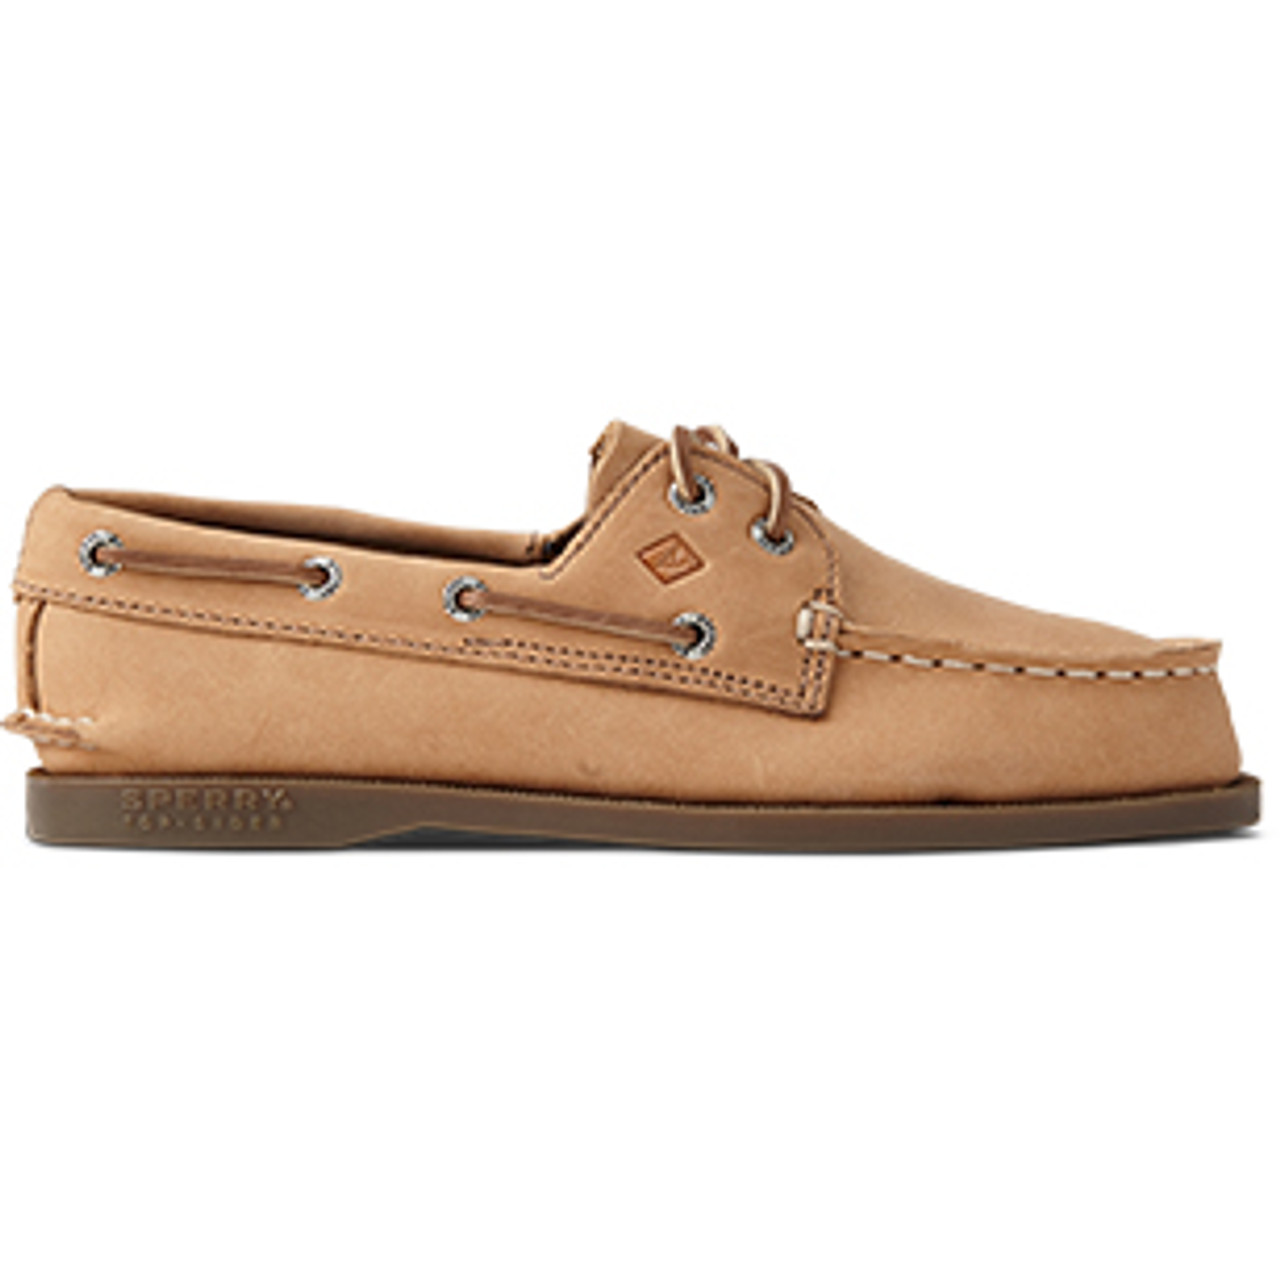 How to Relace Sperry and other Boat Shoes (Easy Way) 